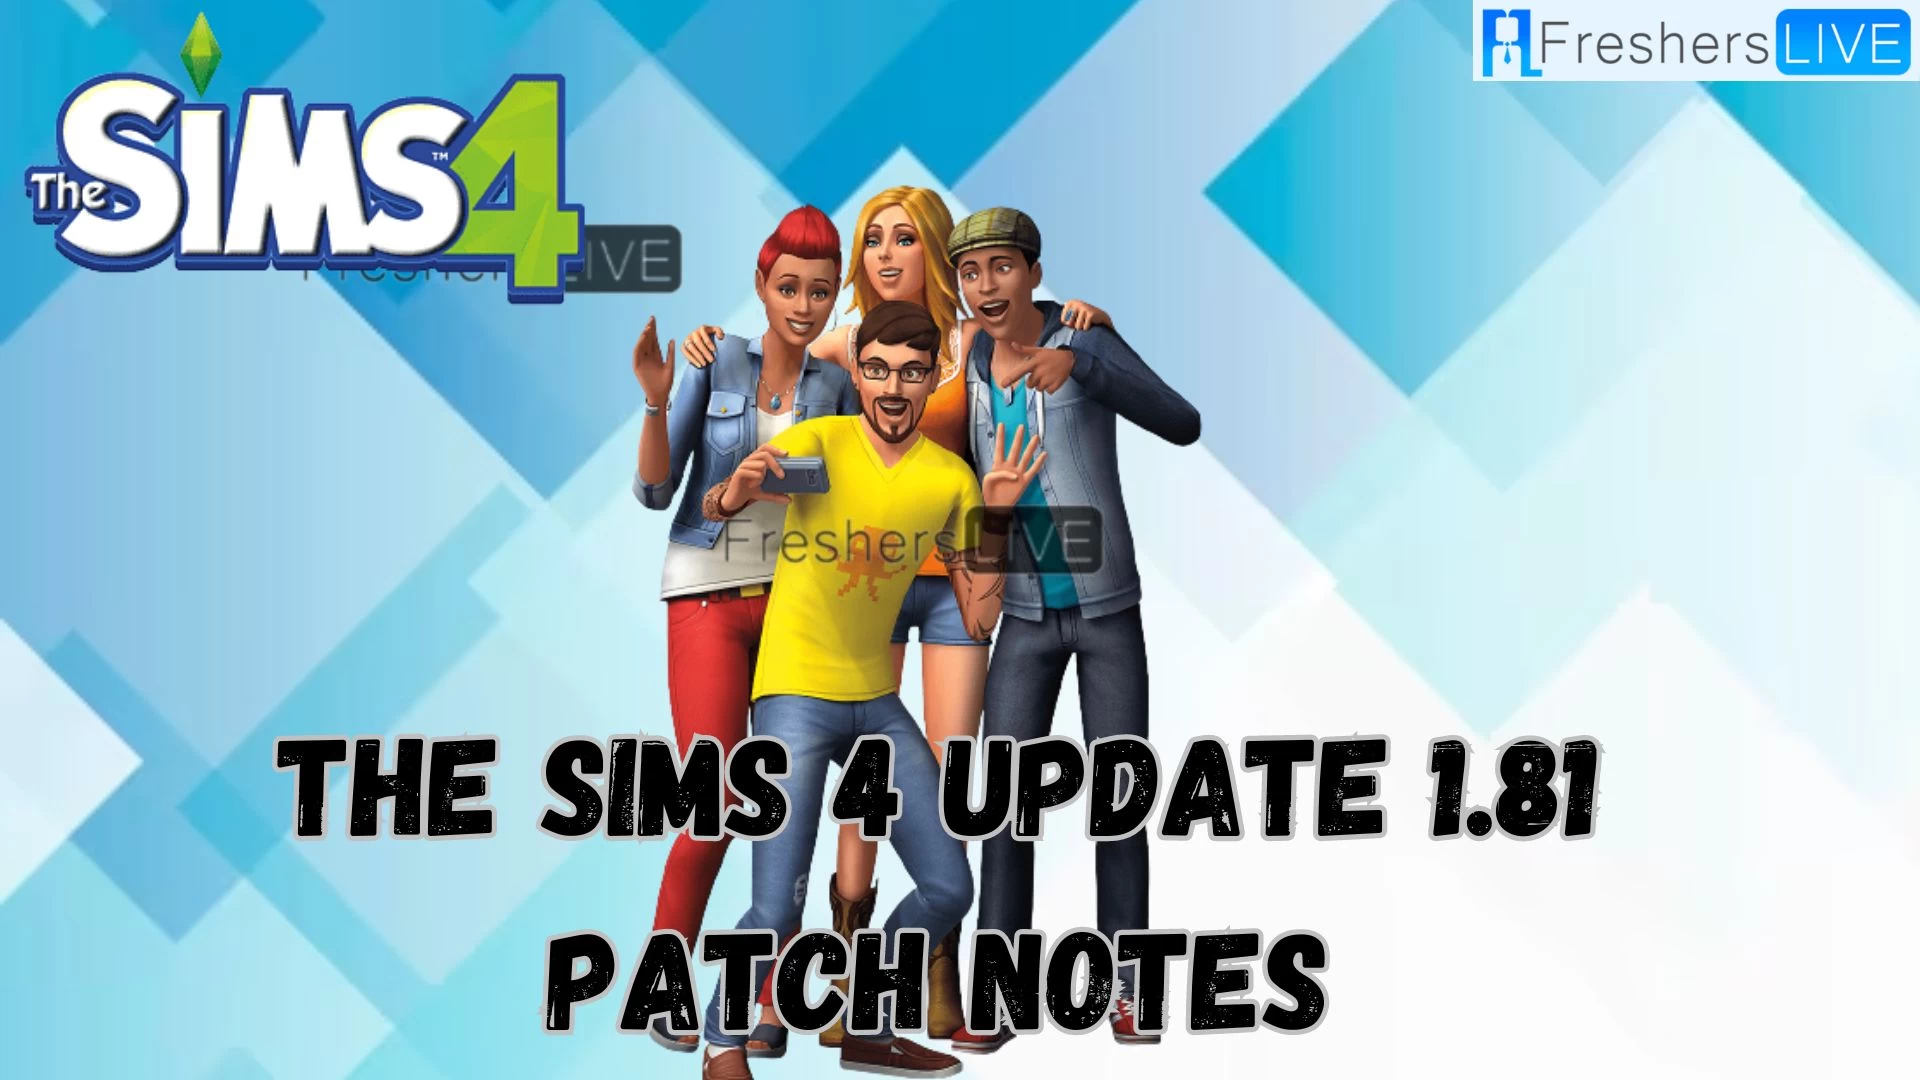 The Sims 4 Update 1.81 Patch Notes, What is New in the Patch Notes?